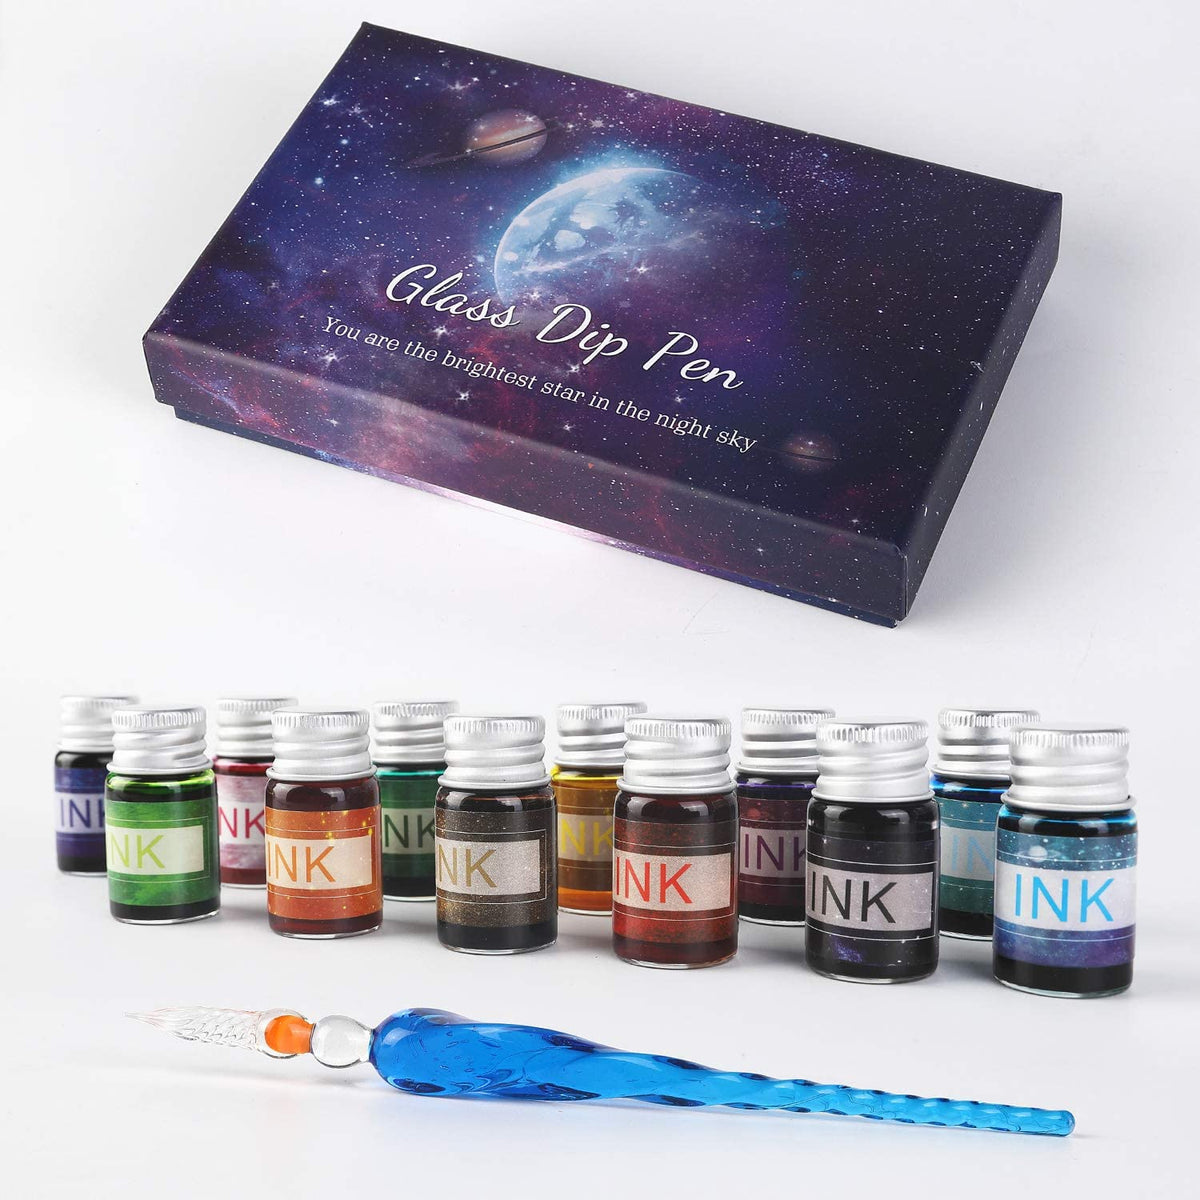 Crystal Glass Dip Pen - Vintage Calligraphy Set- 1 Glass Dip Pen and 12 Multicoloured Ink- for Greeting Cards, Poster Cards, Signatures, Calligraphy, Drawing, Writing, Decoration, and Gift GC-17